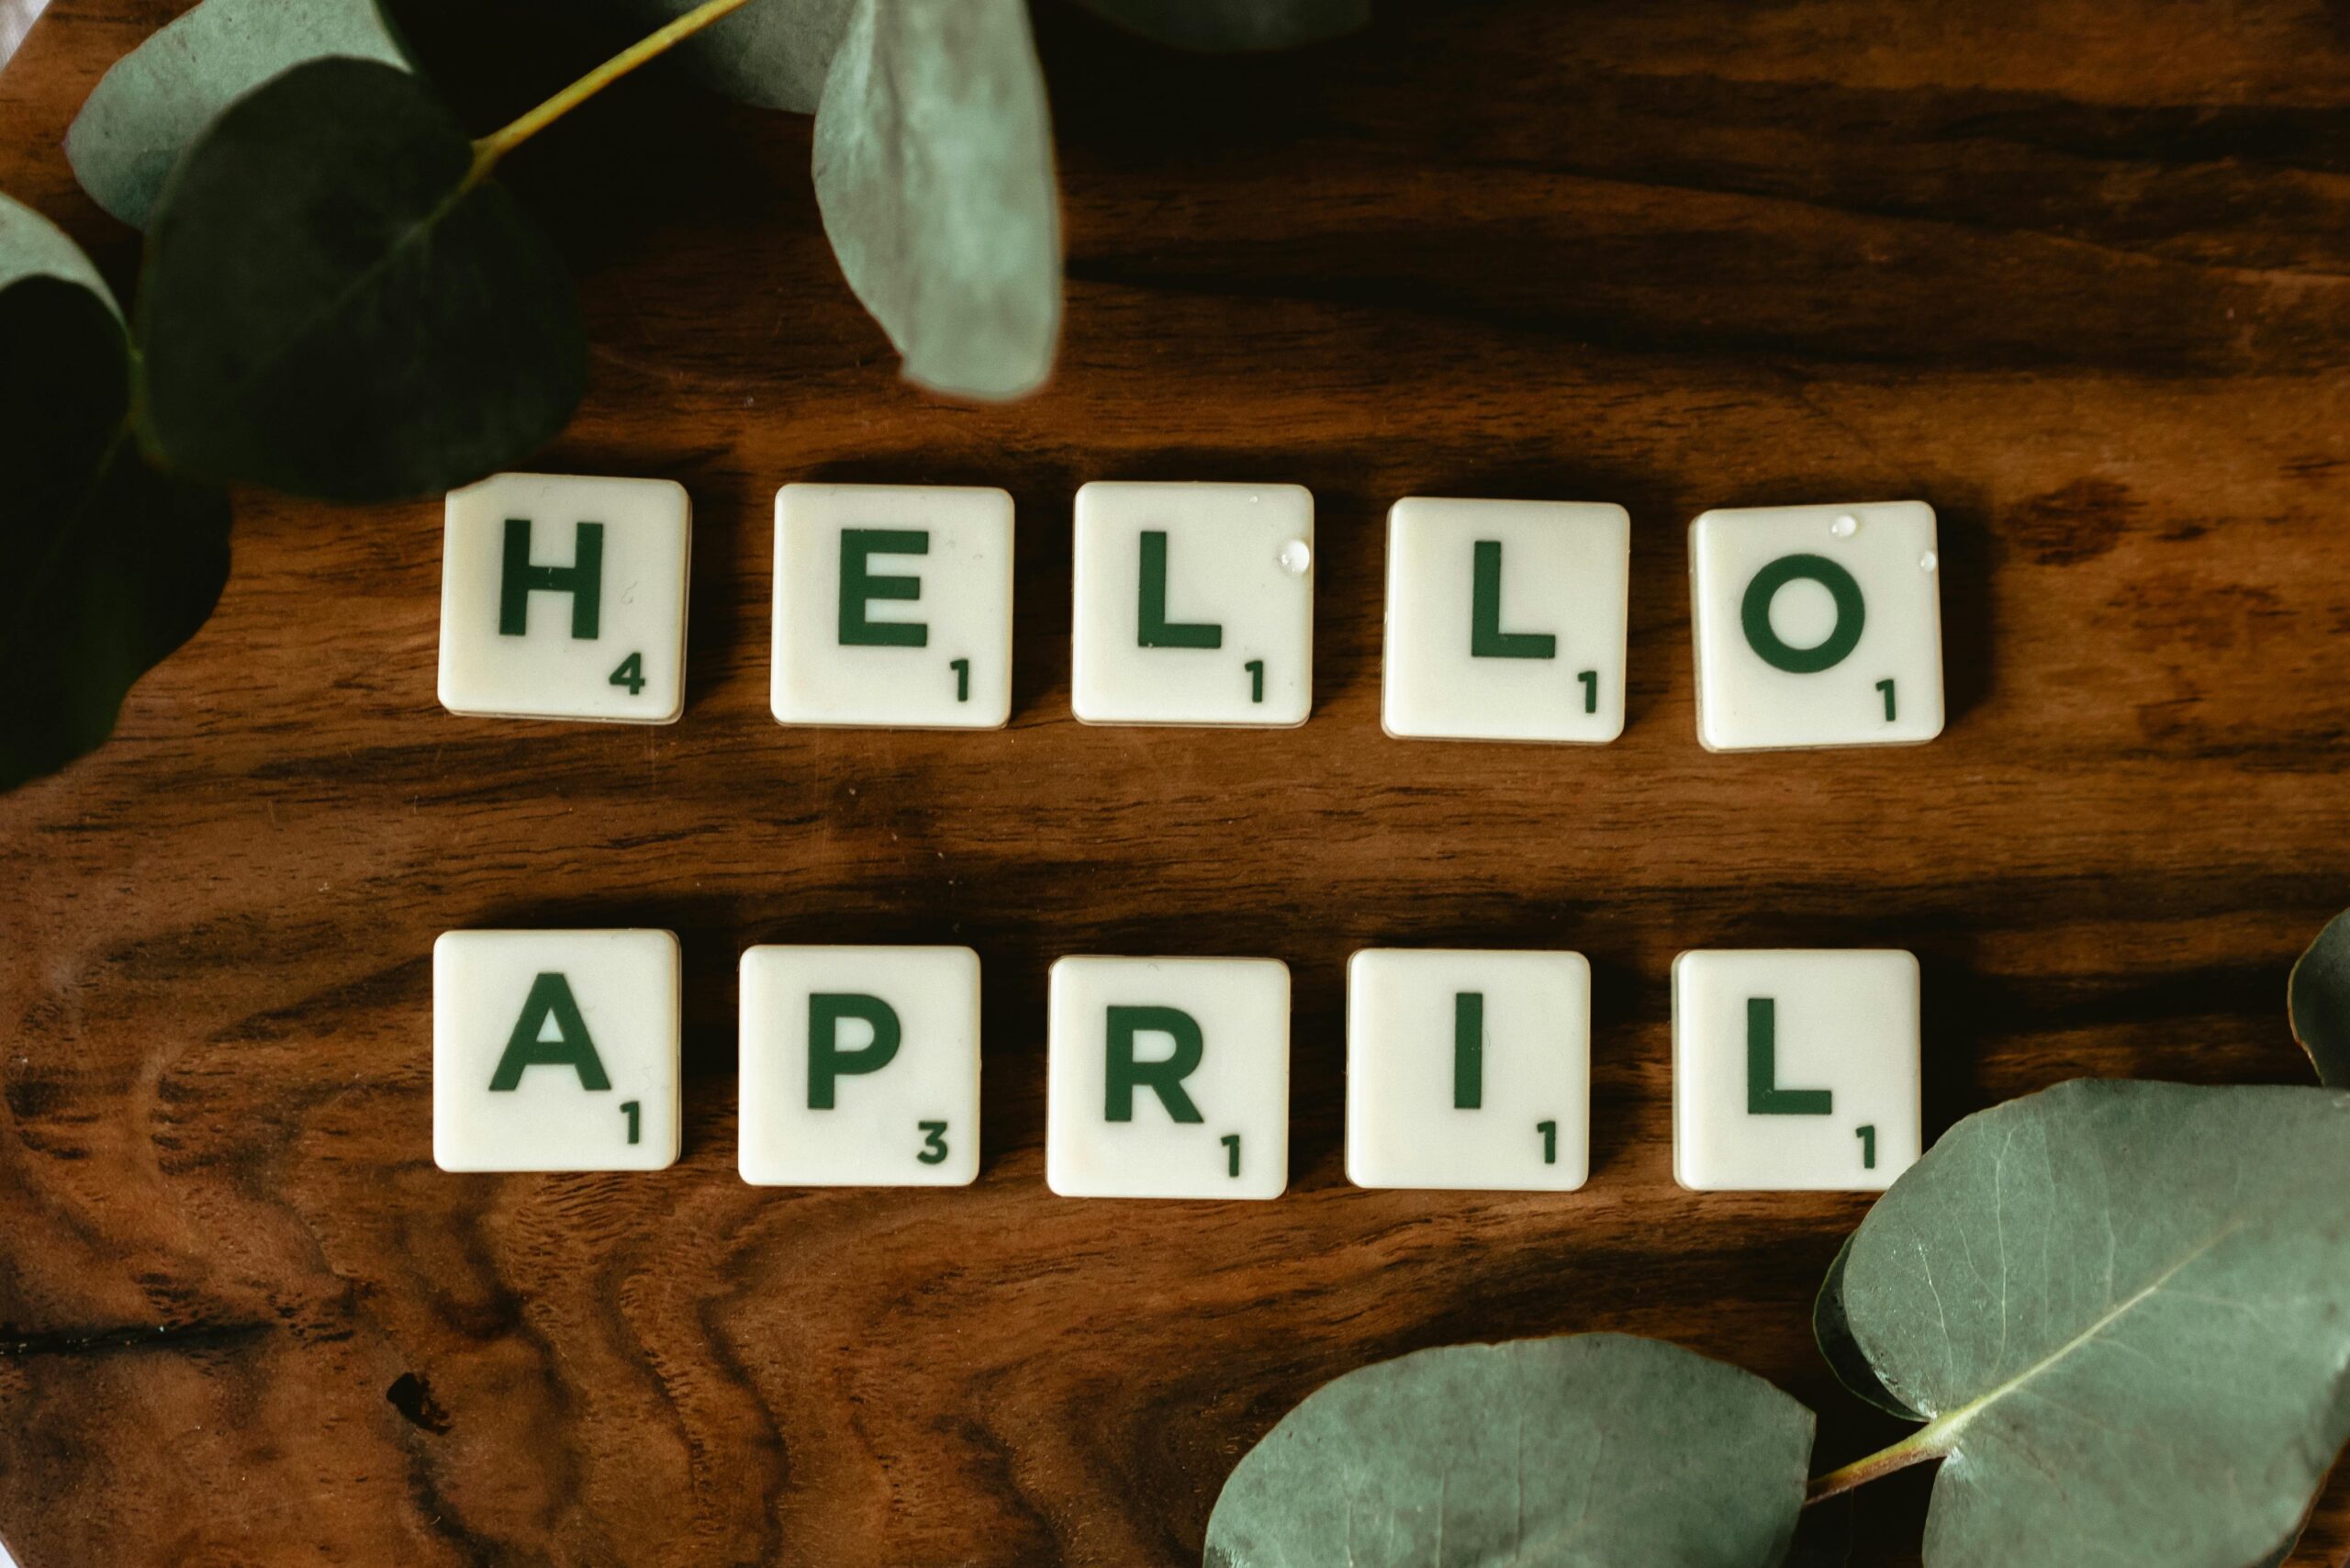 tile letters spell out "Hello April"